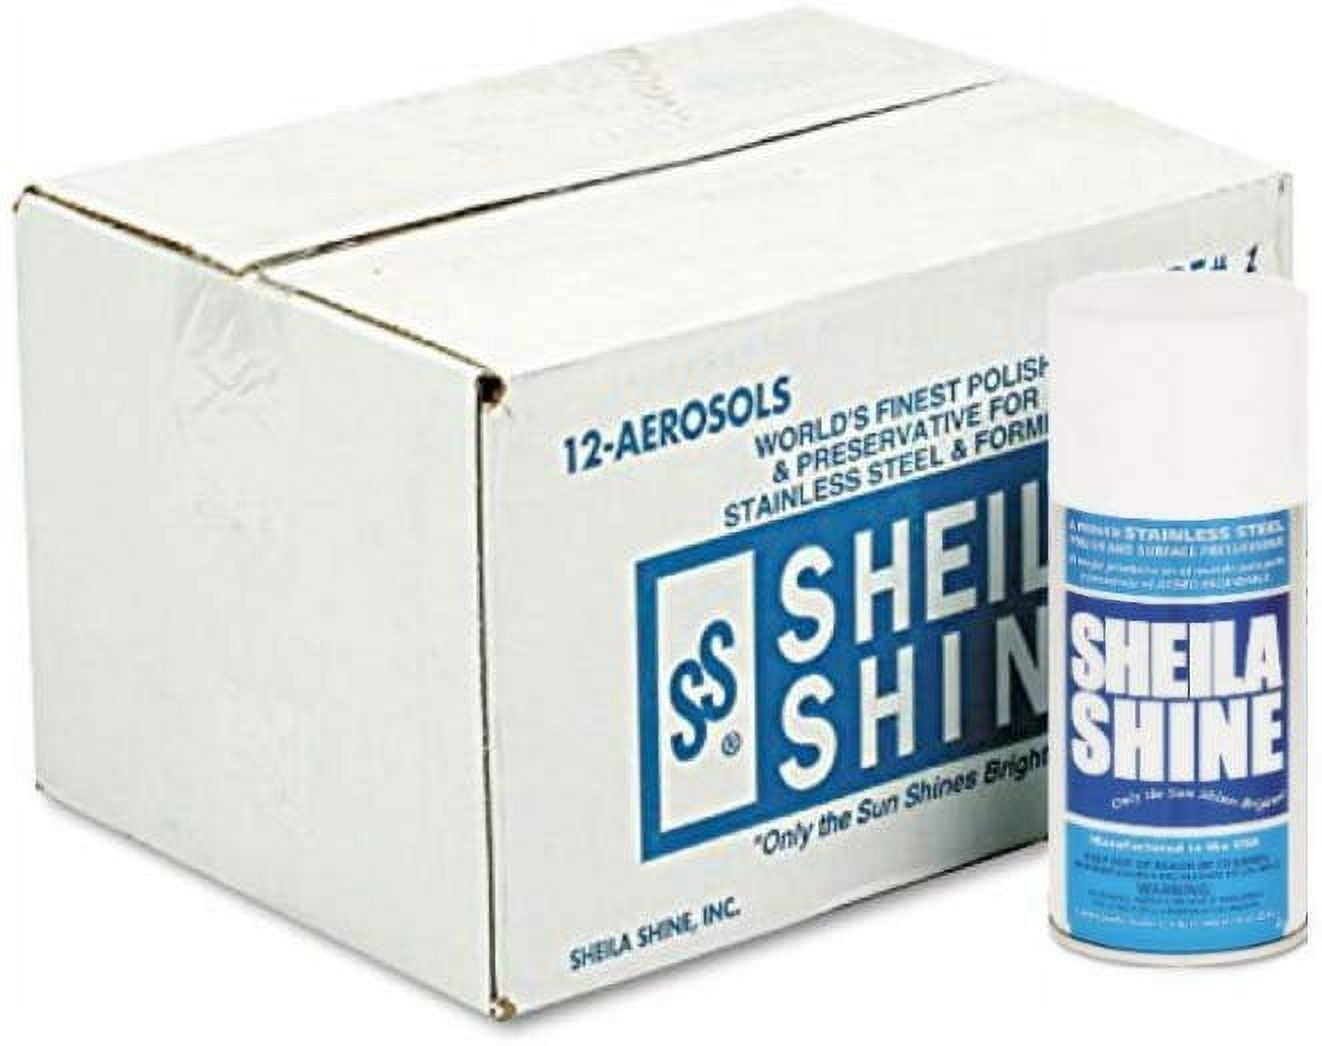 Sheila Shine Stainless Steel Polish & Cleaner | 10 Aerosol Spray Can|  Protects Appliances from Fingerprints and Grease Marks | Residue & Streak  Free